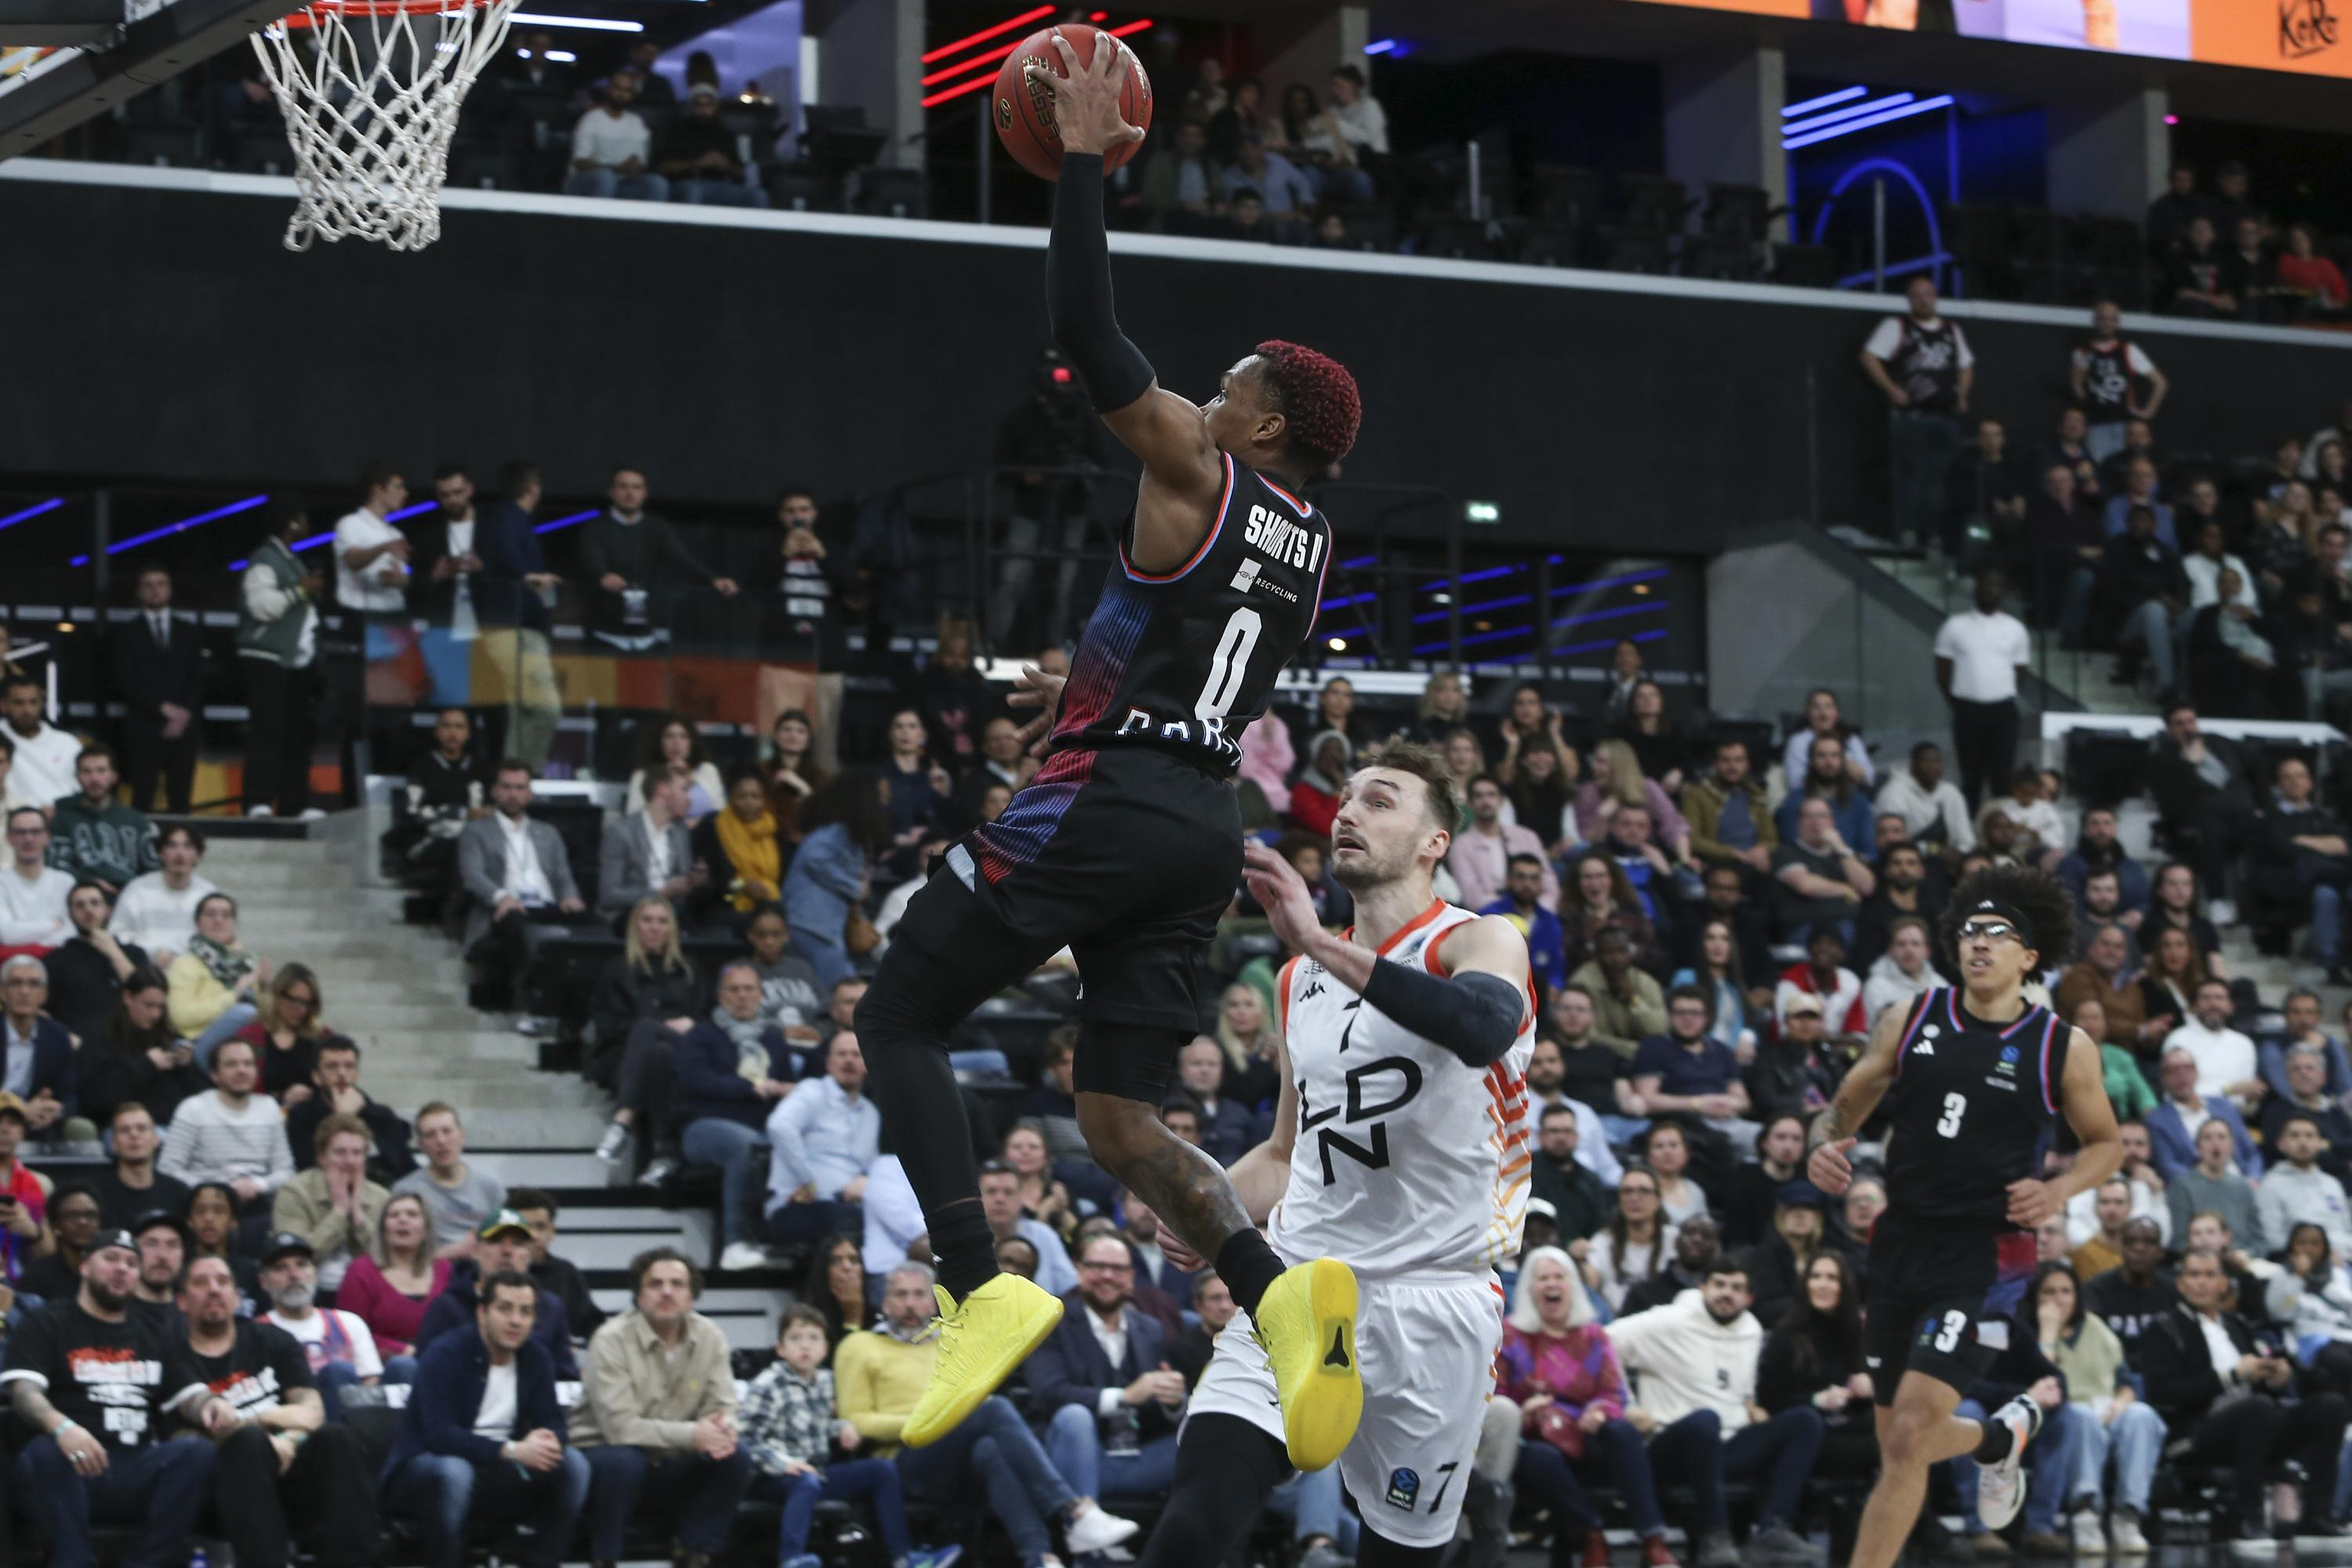 Eurocup: Paris Basketball defeats London and moves closer to the final